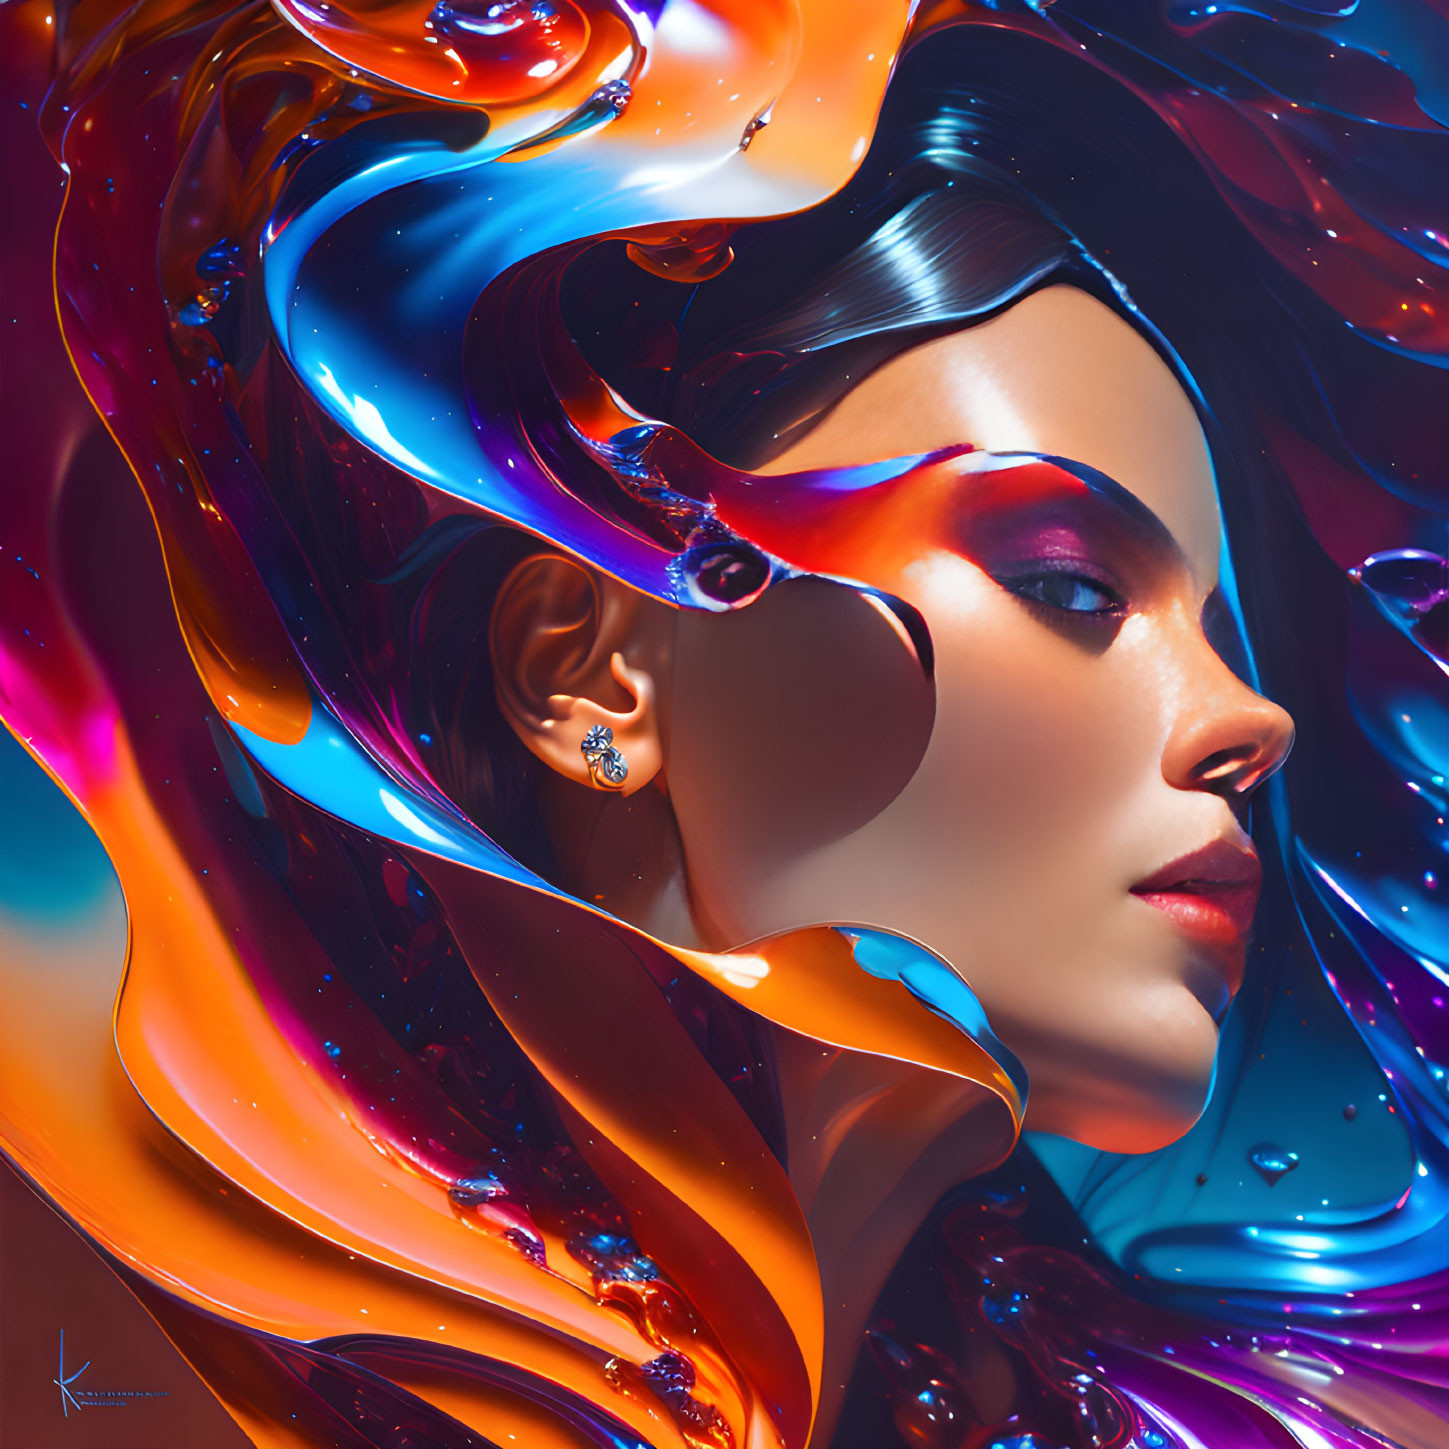 Abstract surreal portrait with vibrant fluid-like shapes in blue, orange, and purple.